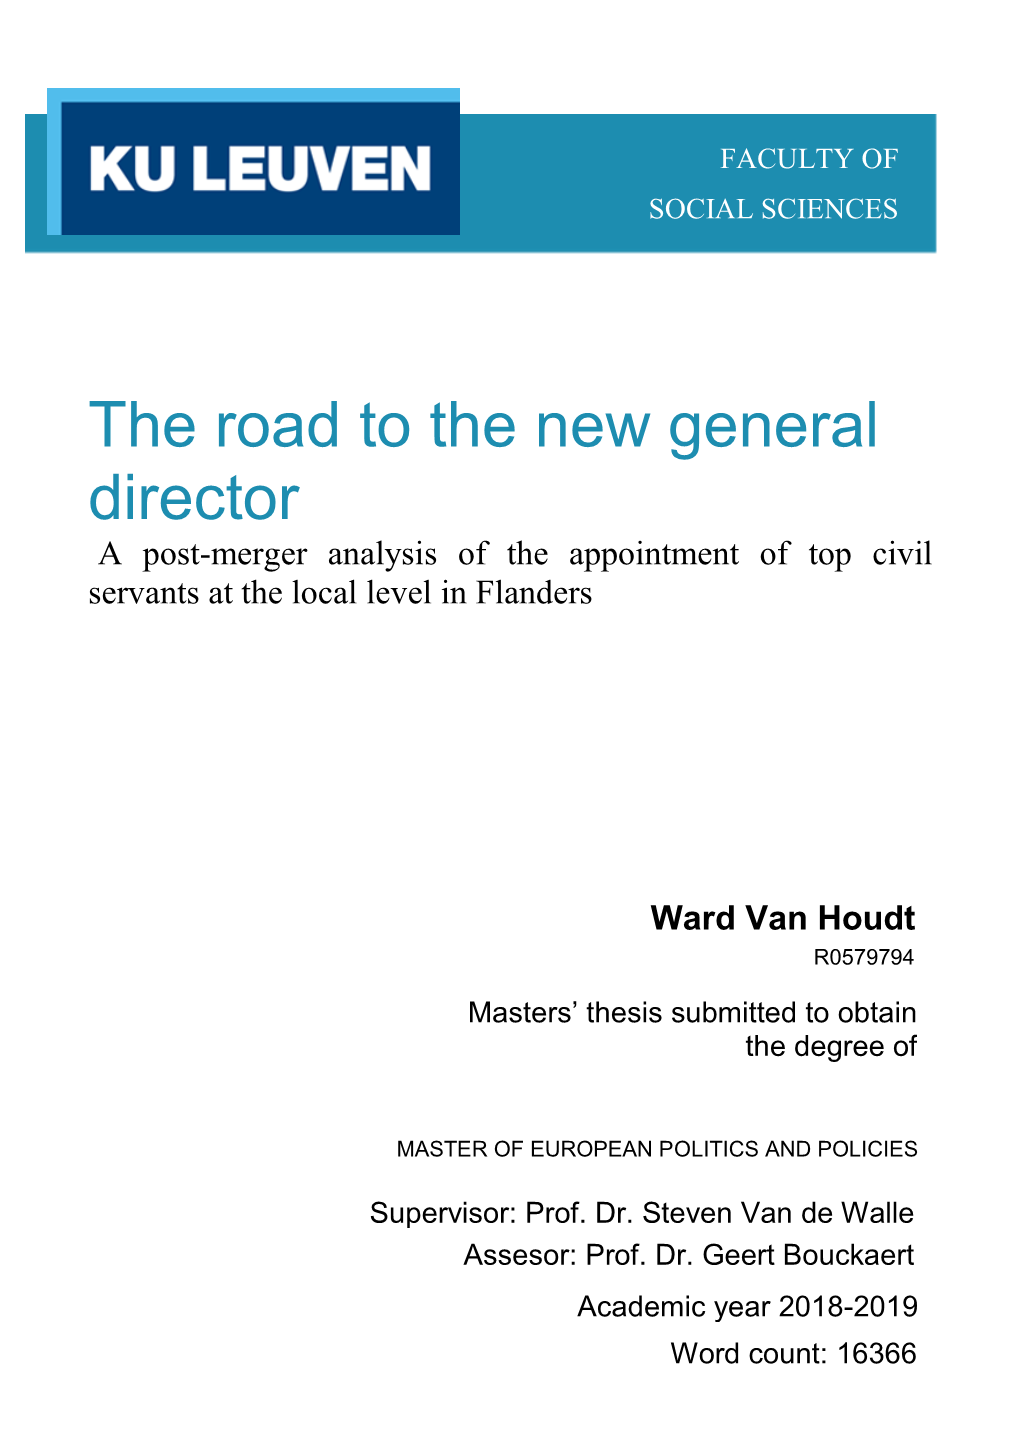 The Road to the New General Director a Post-Merger Analysis of the Appointment of Top Civil Servants at the Local Level in Flanders